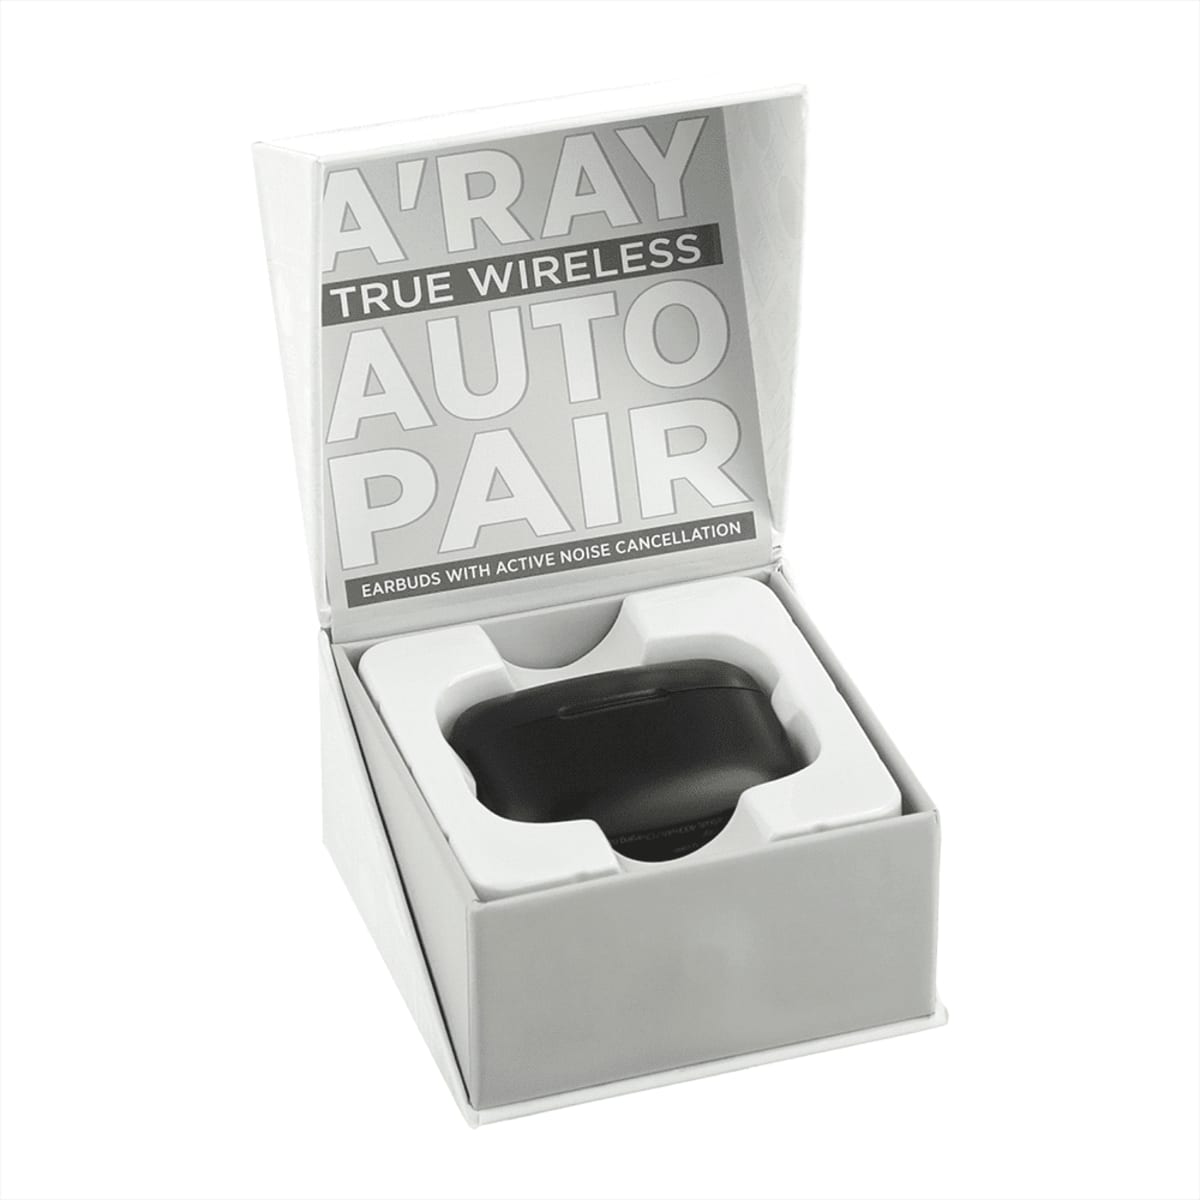 A-Ray True Wireless Auto Pair Earbuds with ANC